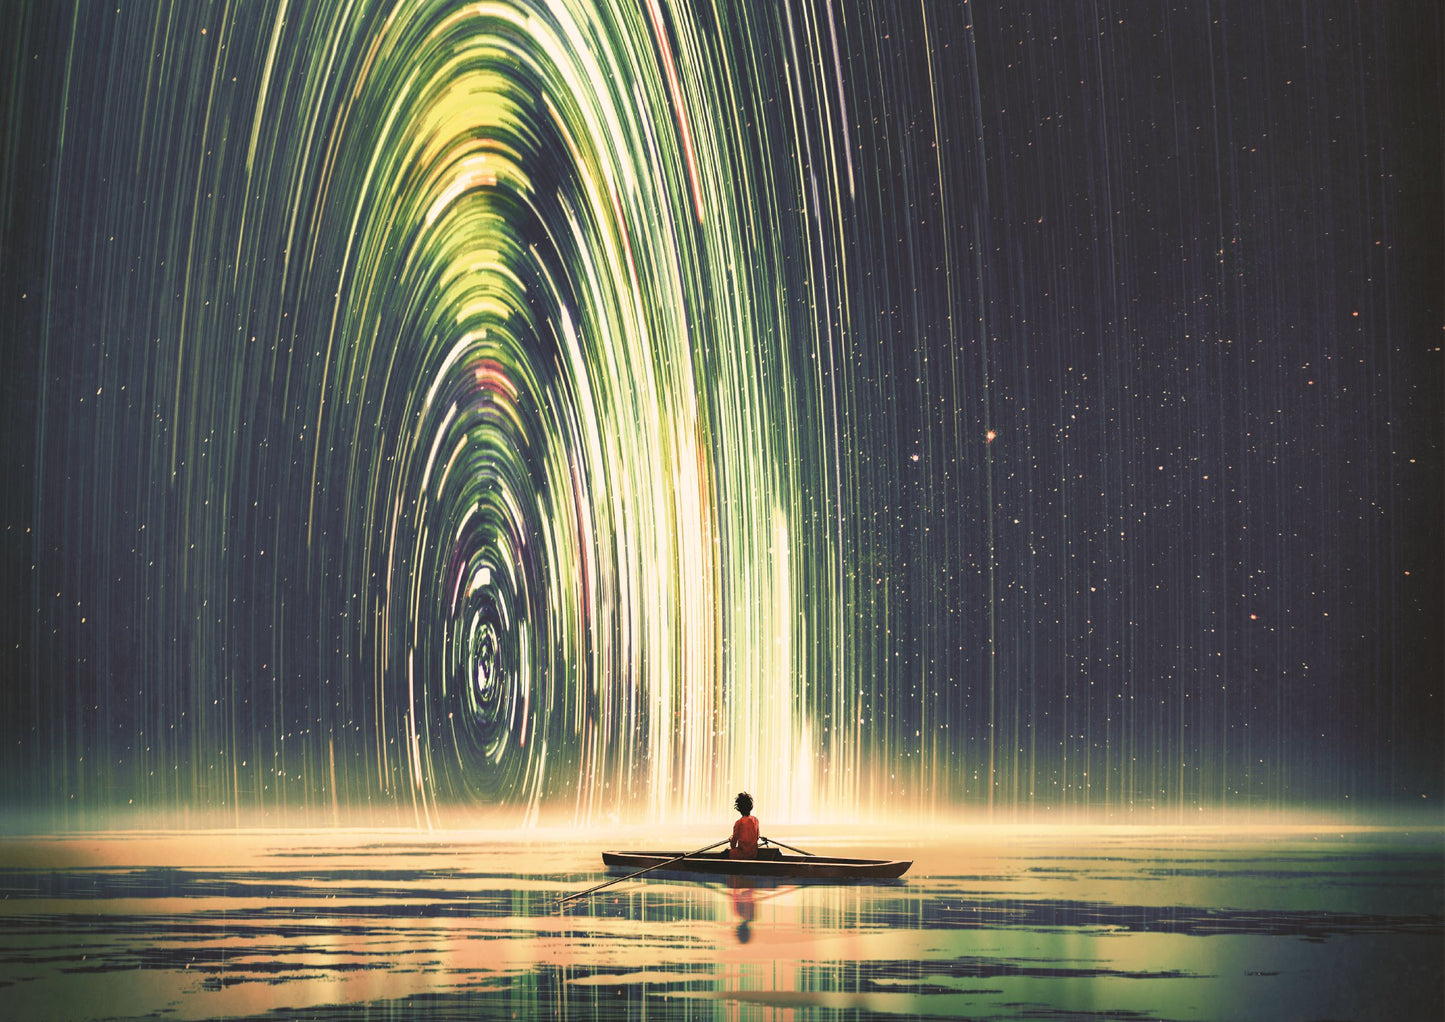 Boy rowing a boat in the sea of the starry night with mysterious light